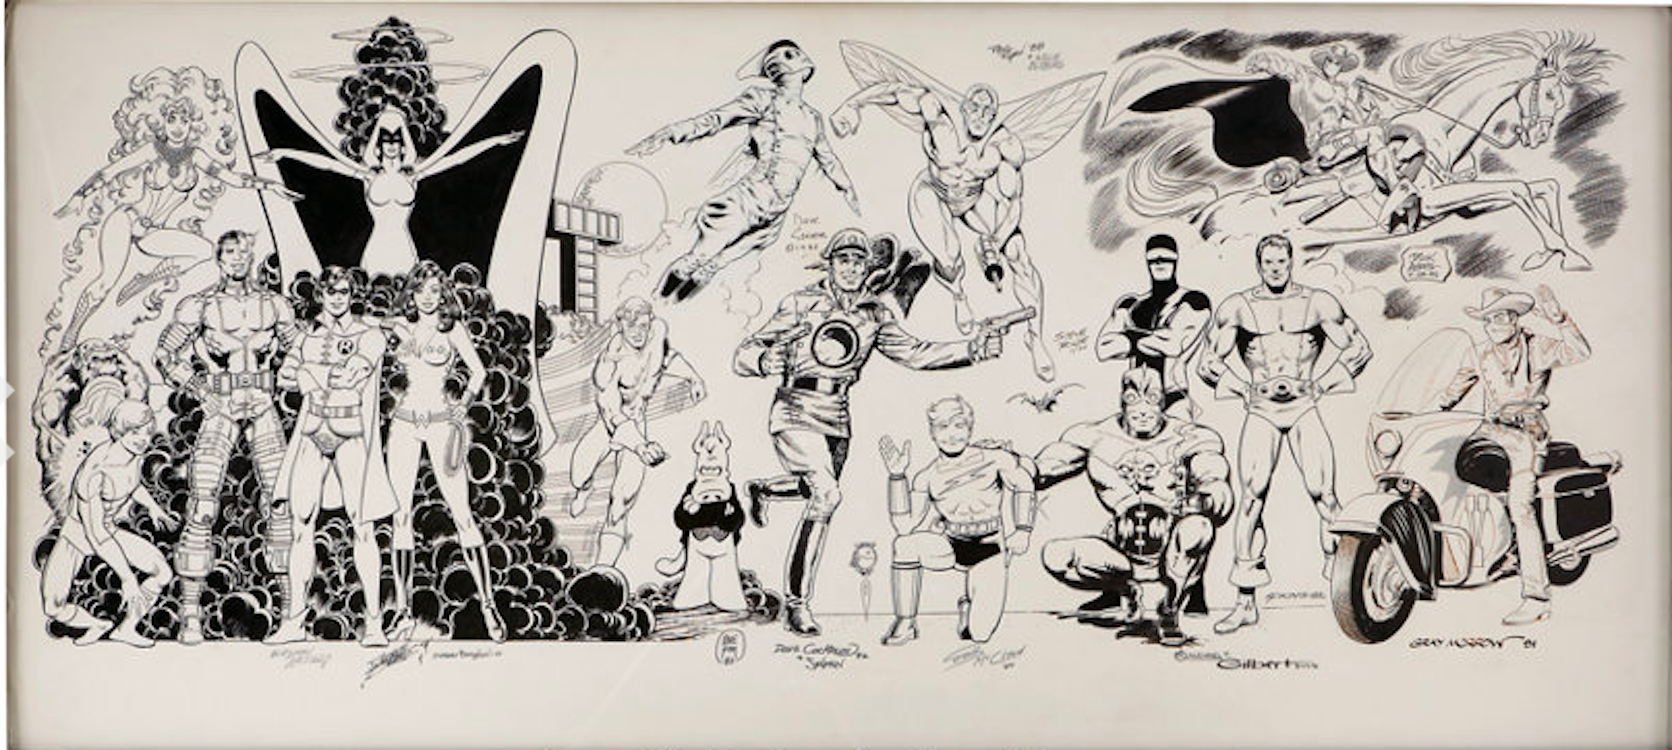 Specialty Illustration by George Perez sold for $5,675. Click here to get your original art appraised.